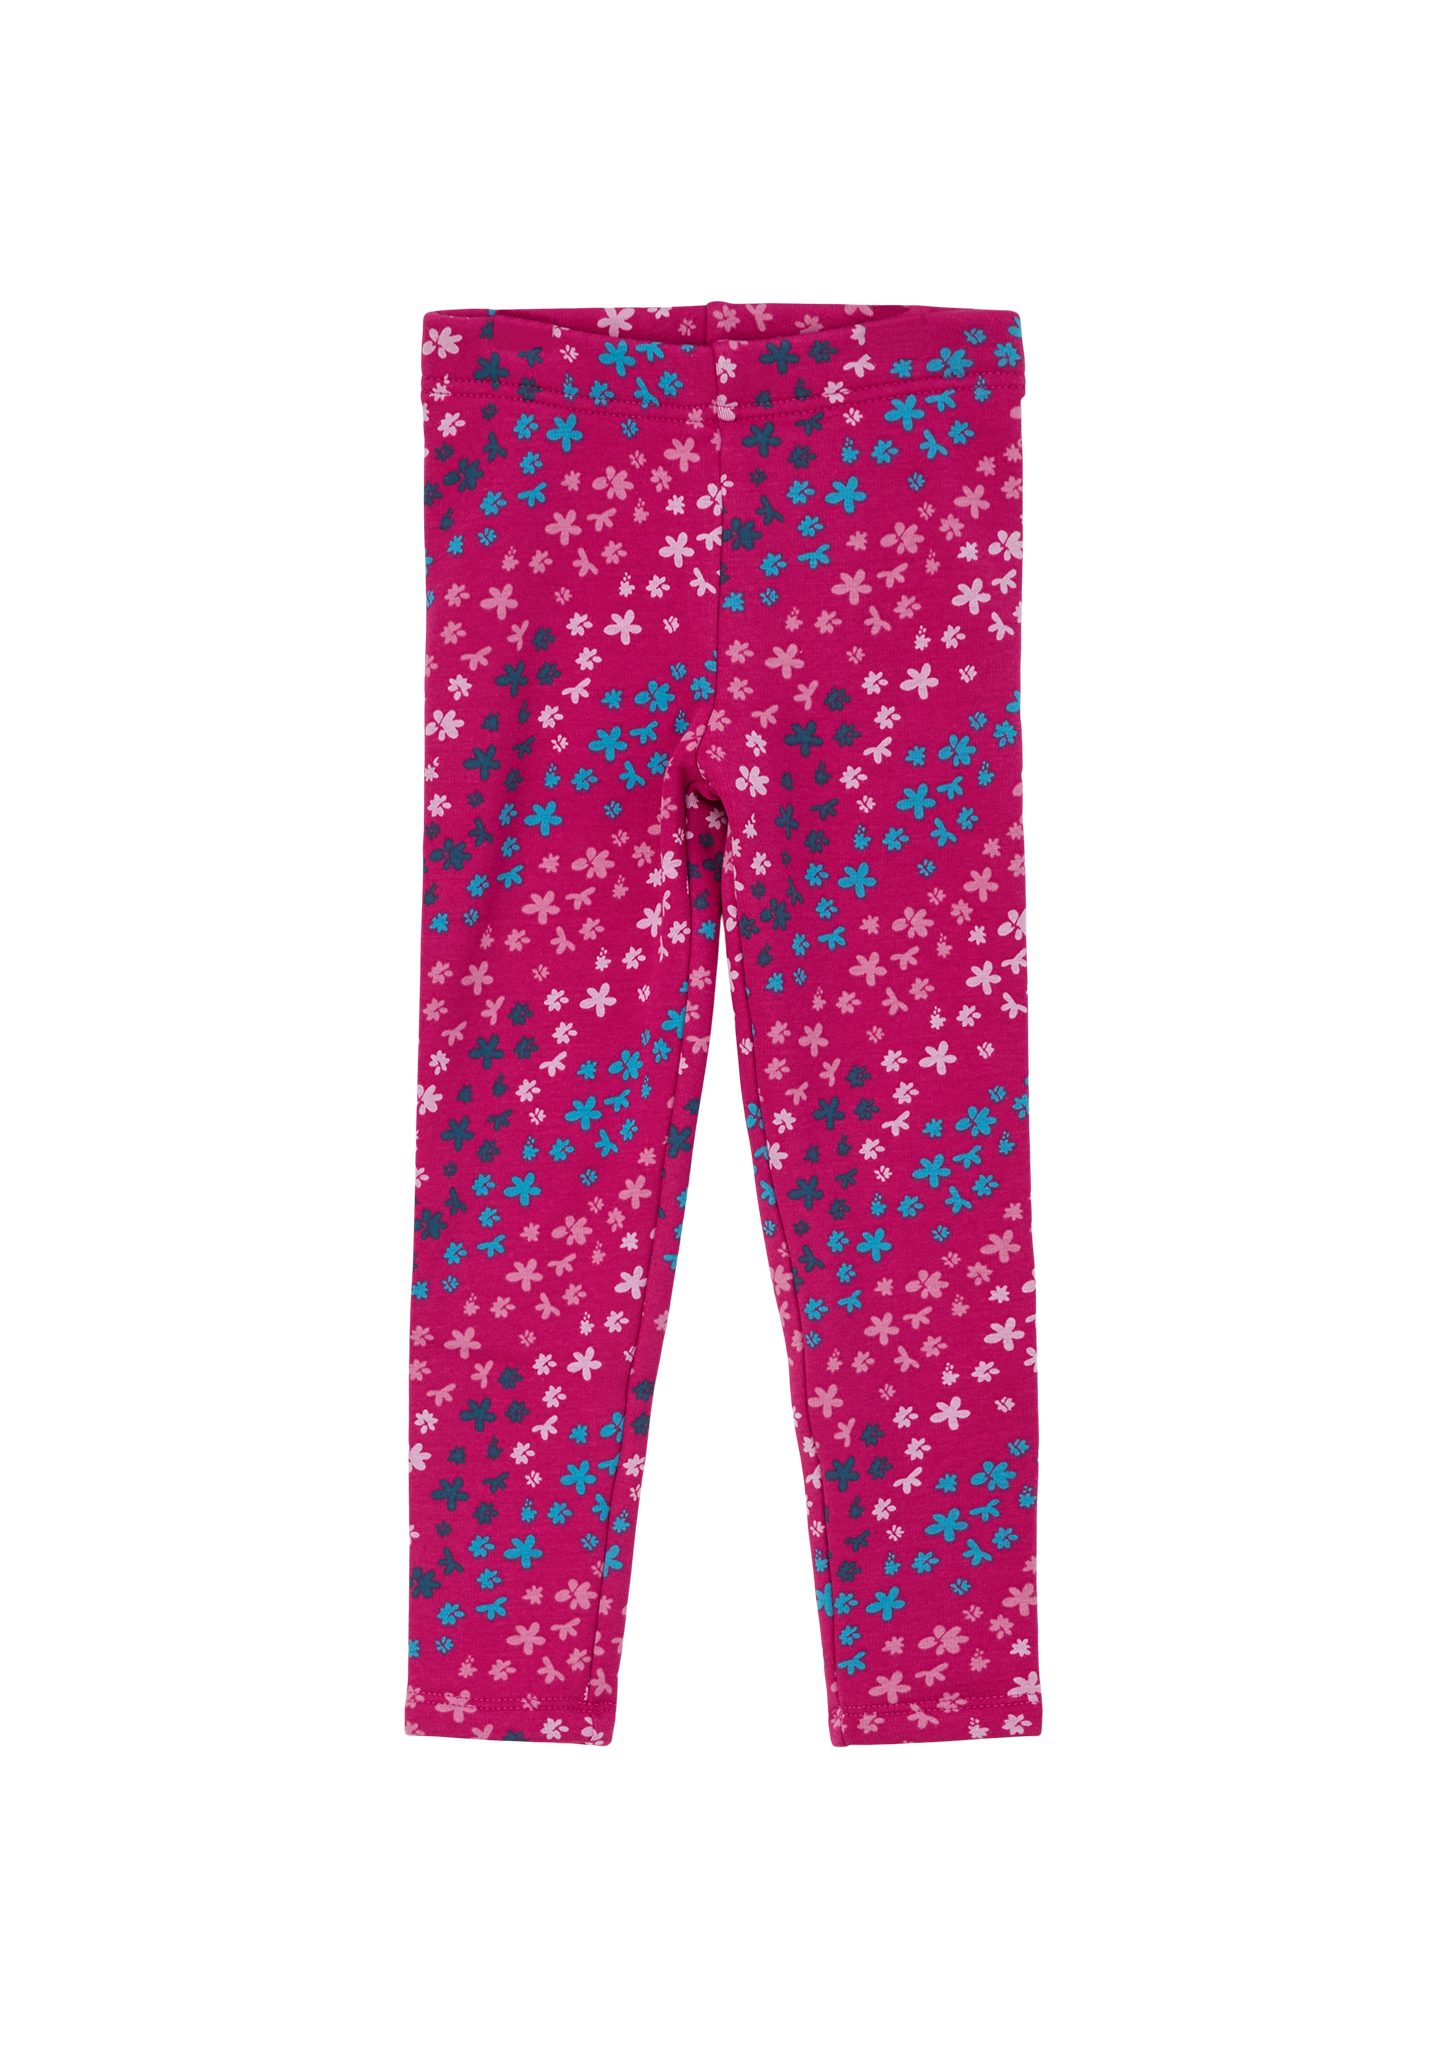 Leggings s.Oliver Thermofleece-Futter pink Leggings mit